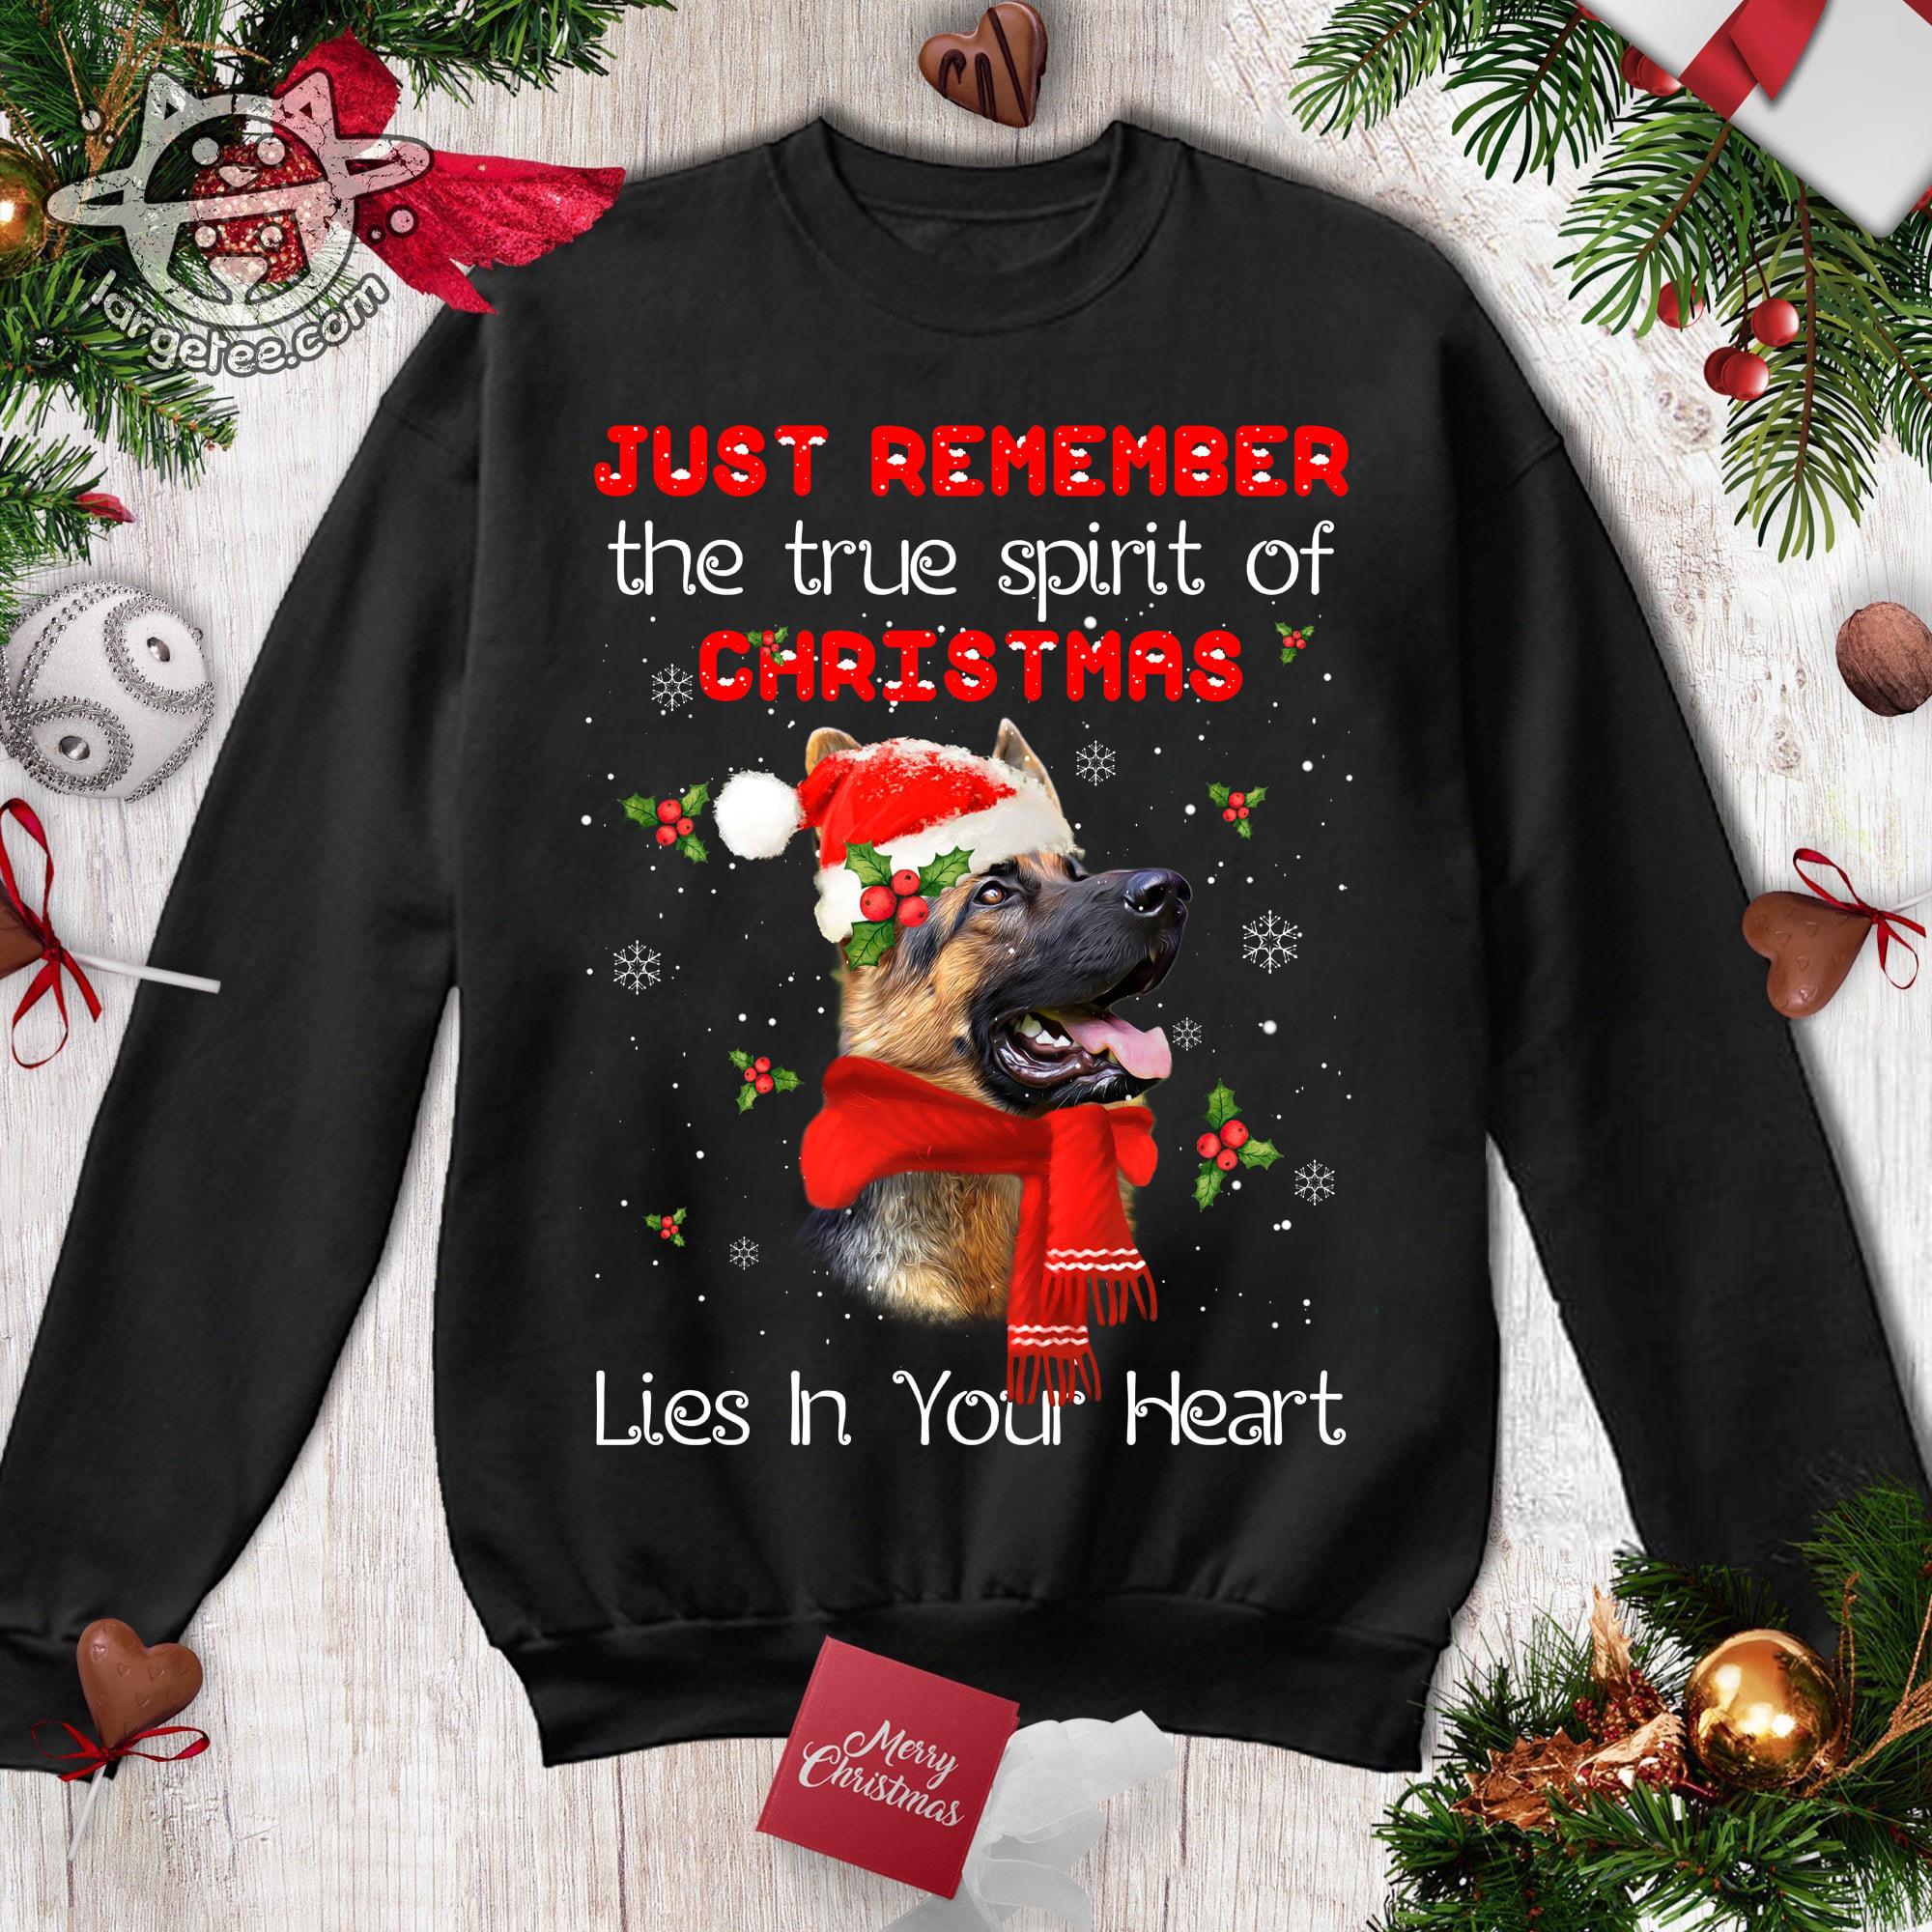 Just remember the true spirit of Christmas lies in your heart - German Shepherd Christmas hat, Christmas ugly sweater